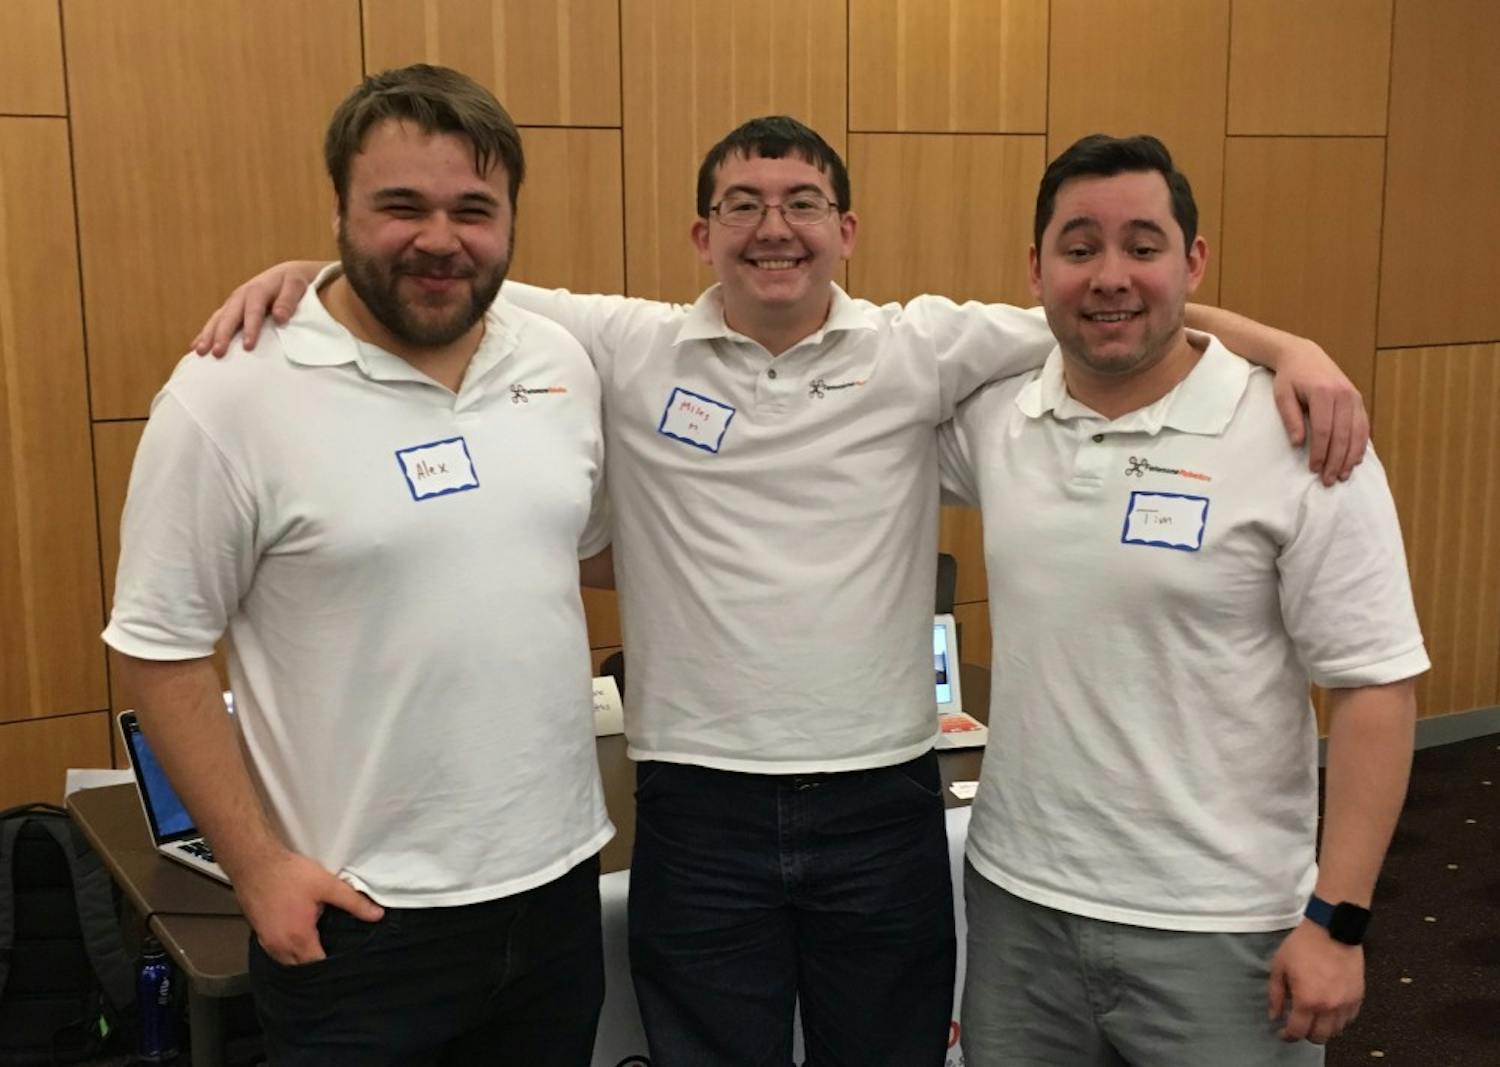 Feromone team members&nbsp;Alex Opstad,&nbsp;Miles Mabey and&nbsp;Tim Medina pose for a photo&nbsp;at ASU's Startup Summit on Sunday,&nbsp;Feb. 19 in Tempe